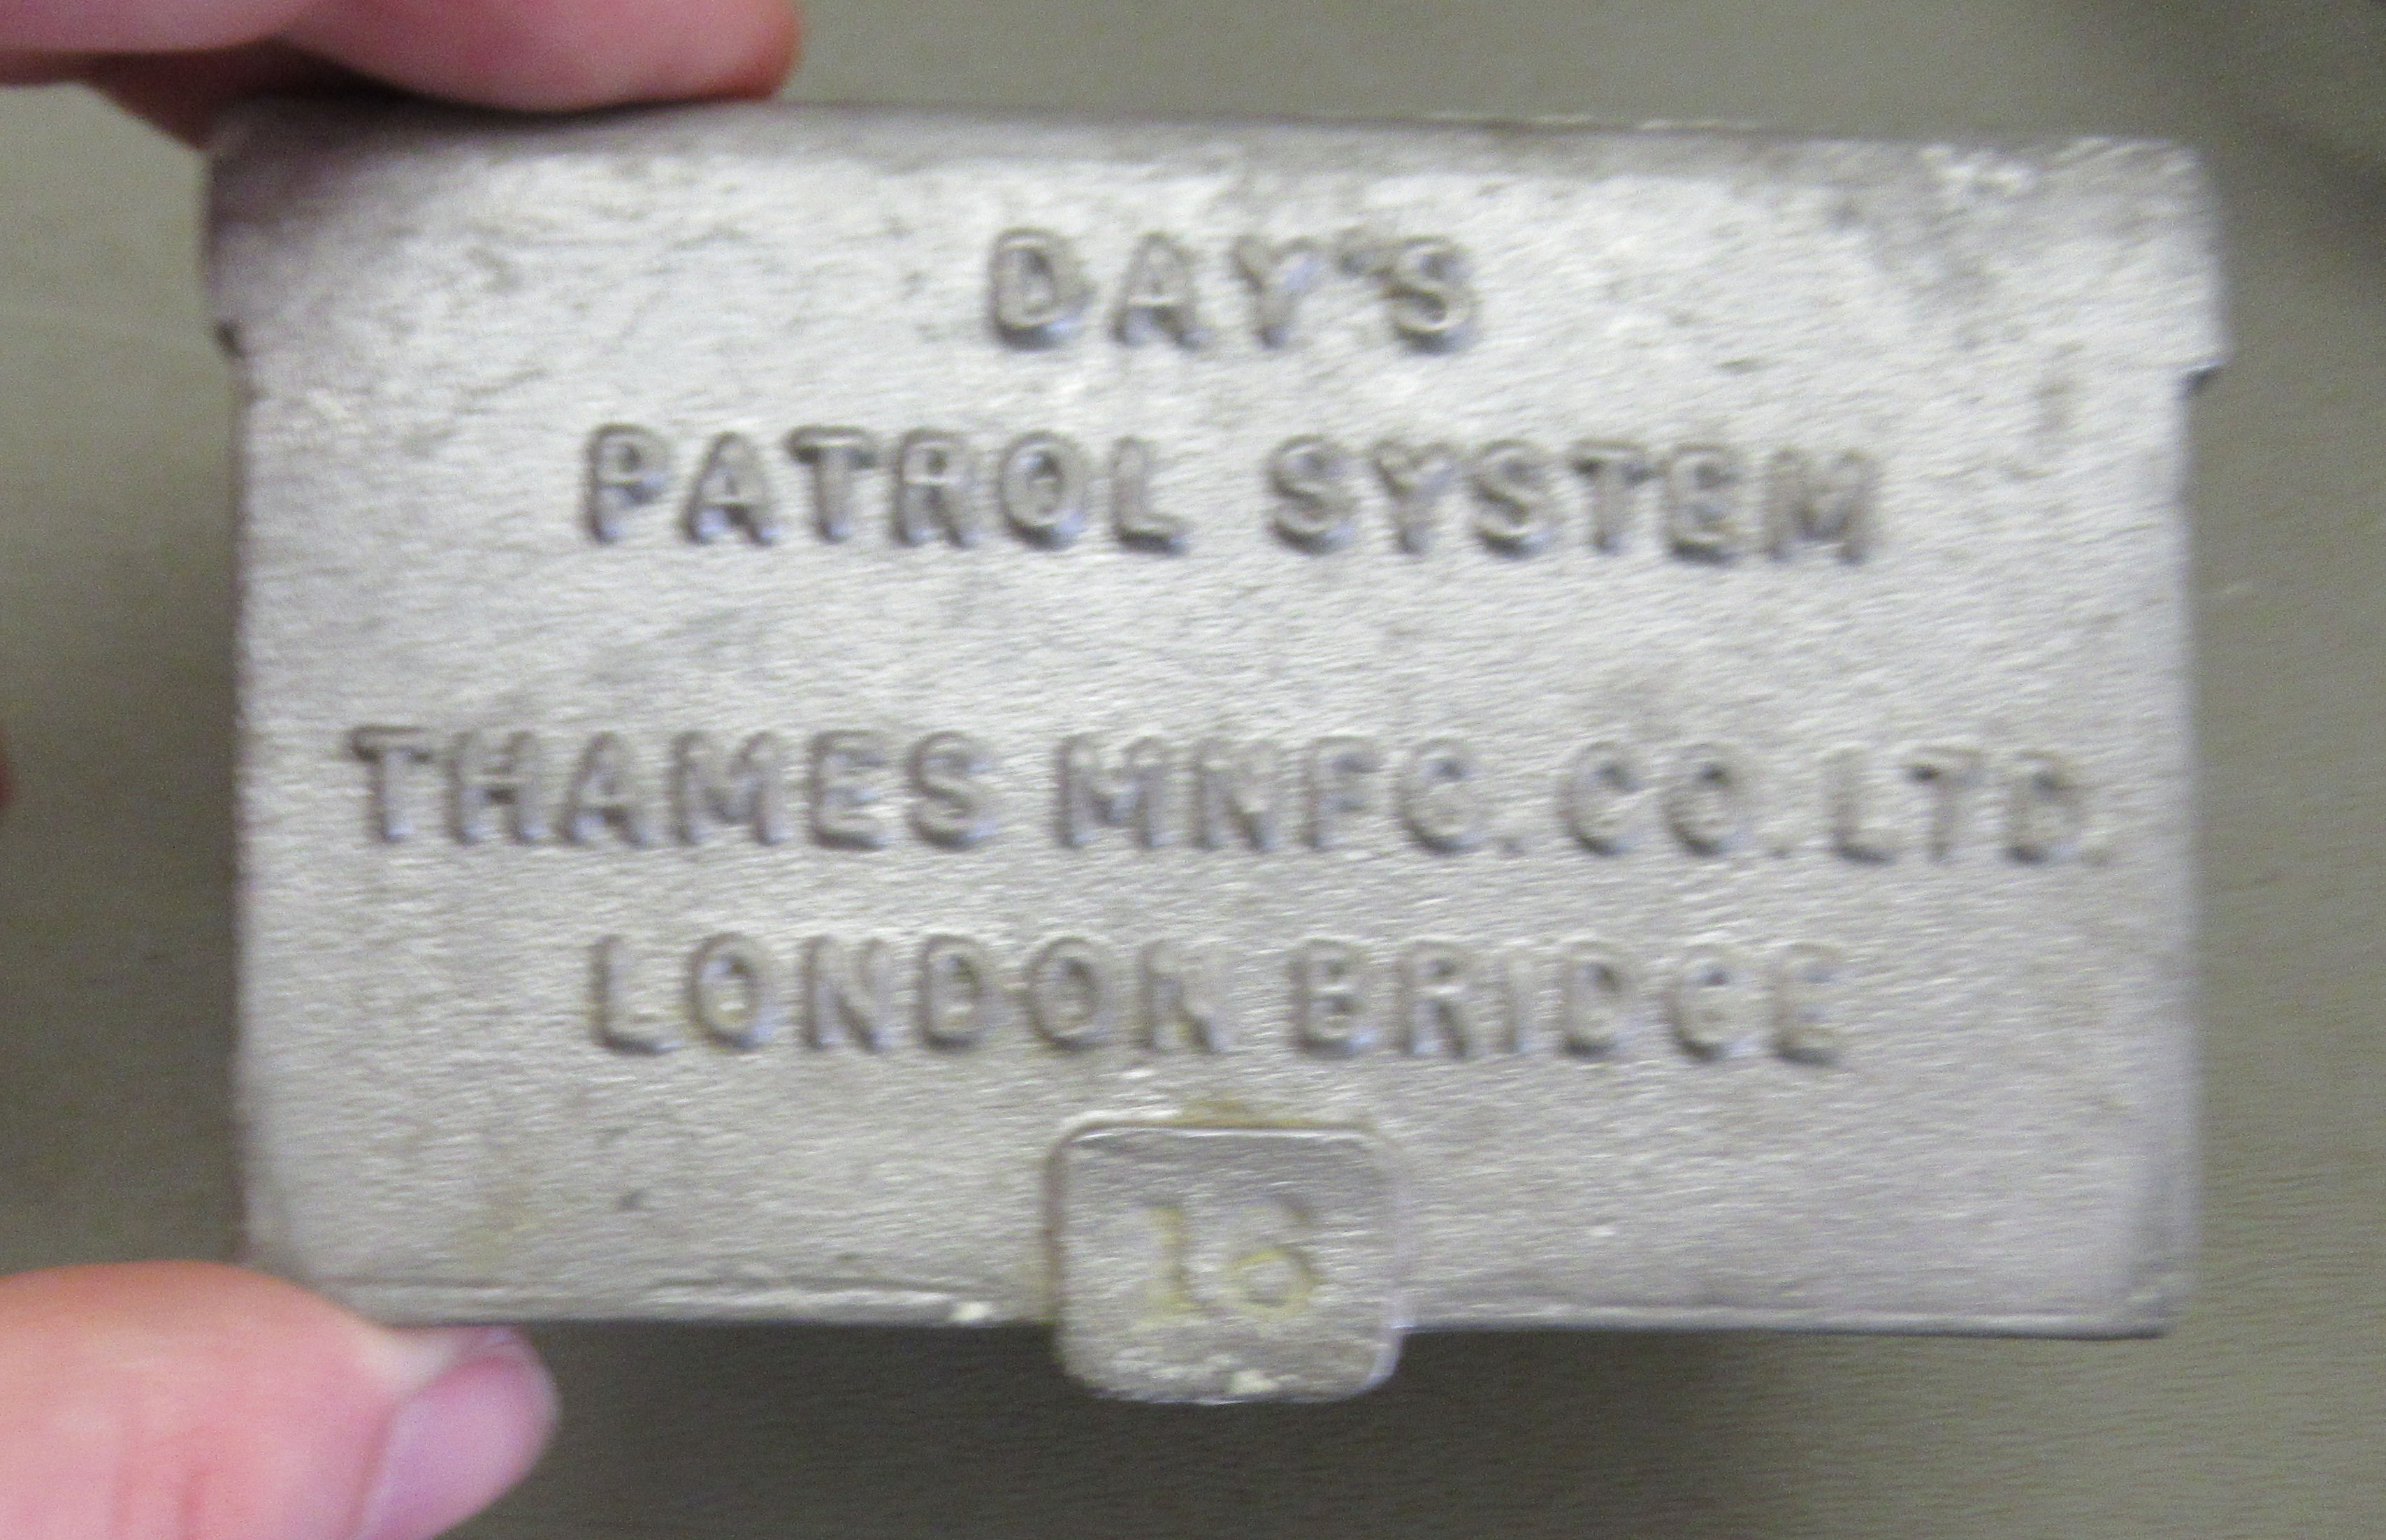 A Thames MNFG.Co.Ltd, London Bridge, Day's Watchman's Tell Tale, in a chromium plated steel case, - Image 3 of 7